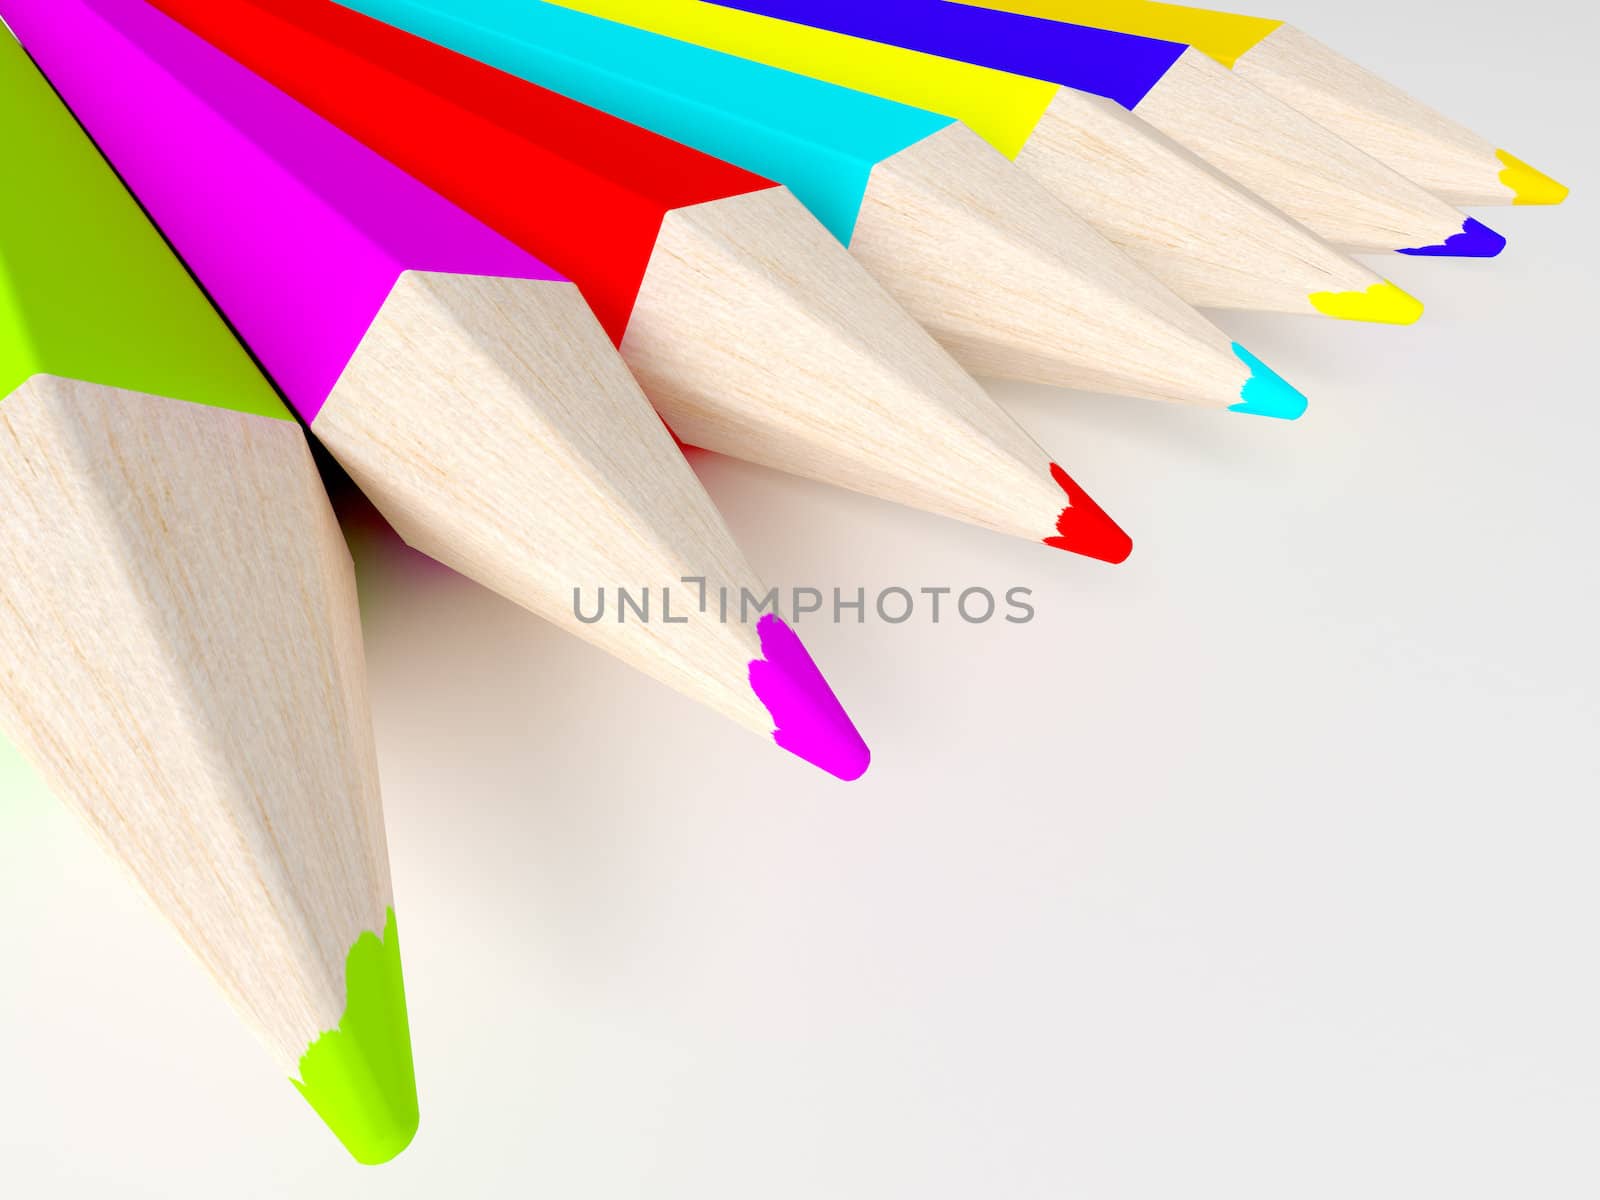 3D render of Colorful pencils on white background.